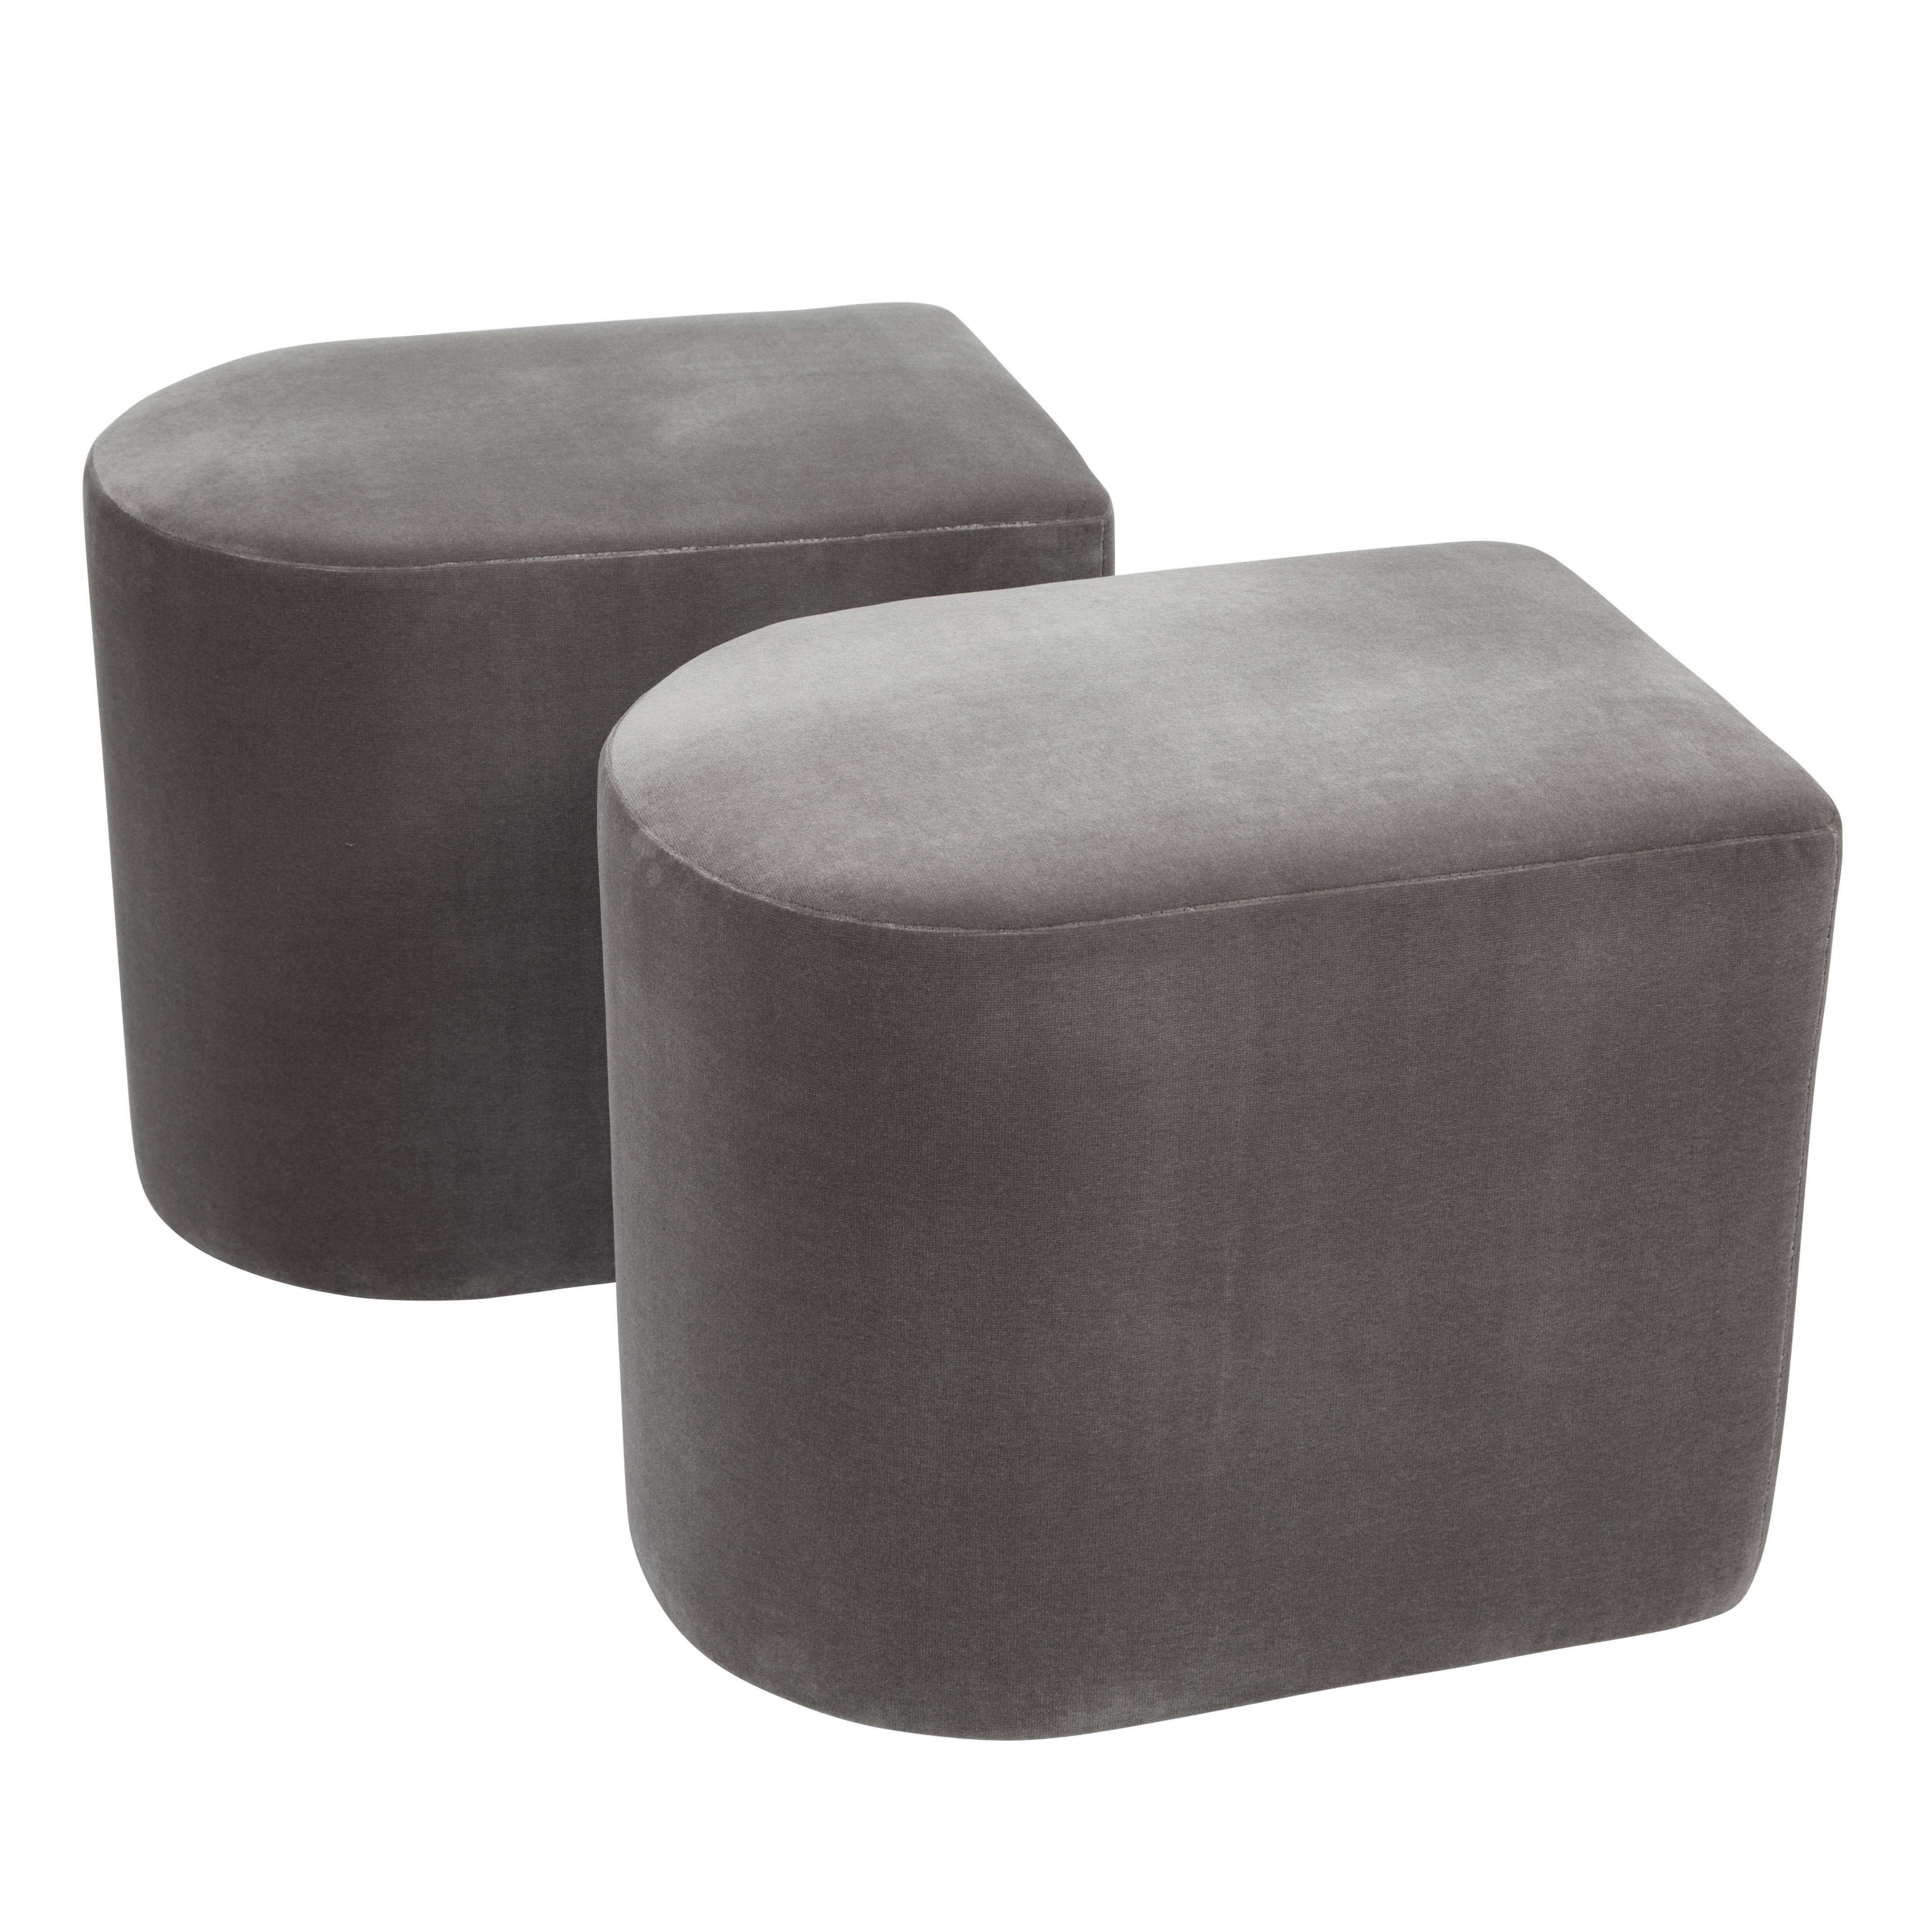 Pair of Milo Baughman D-Shaped Stools on Casters, 1983